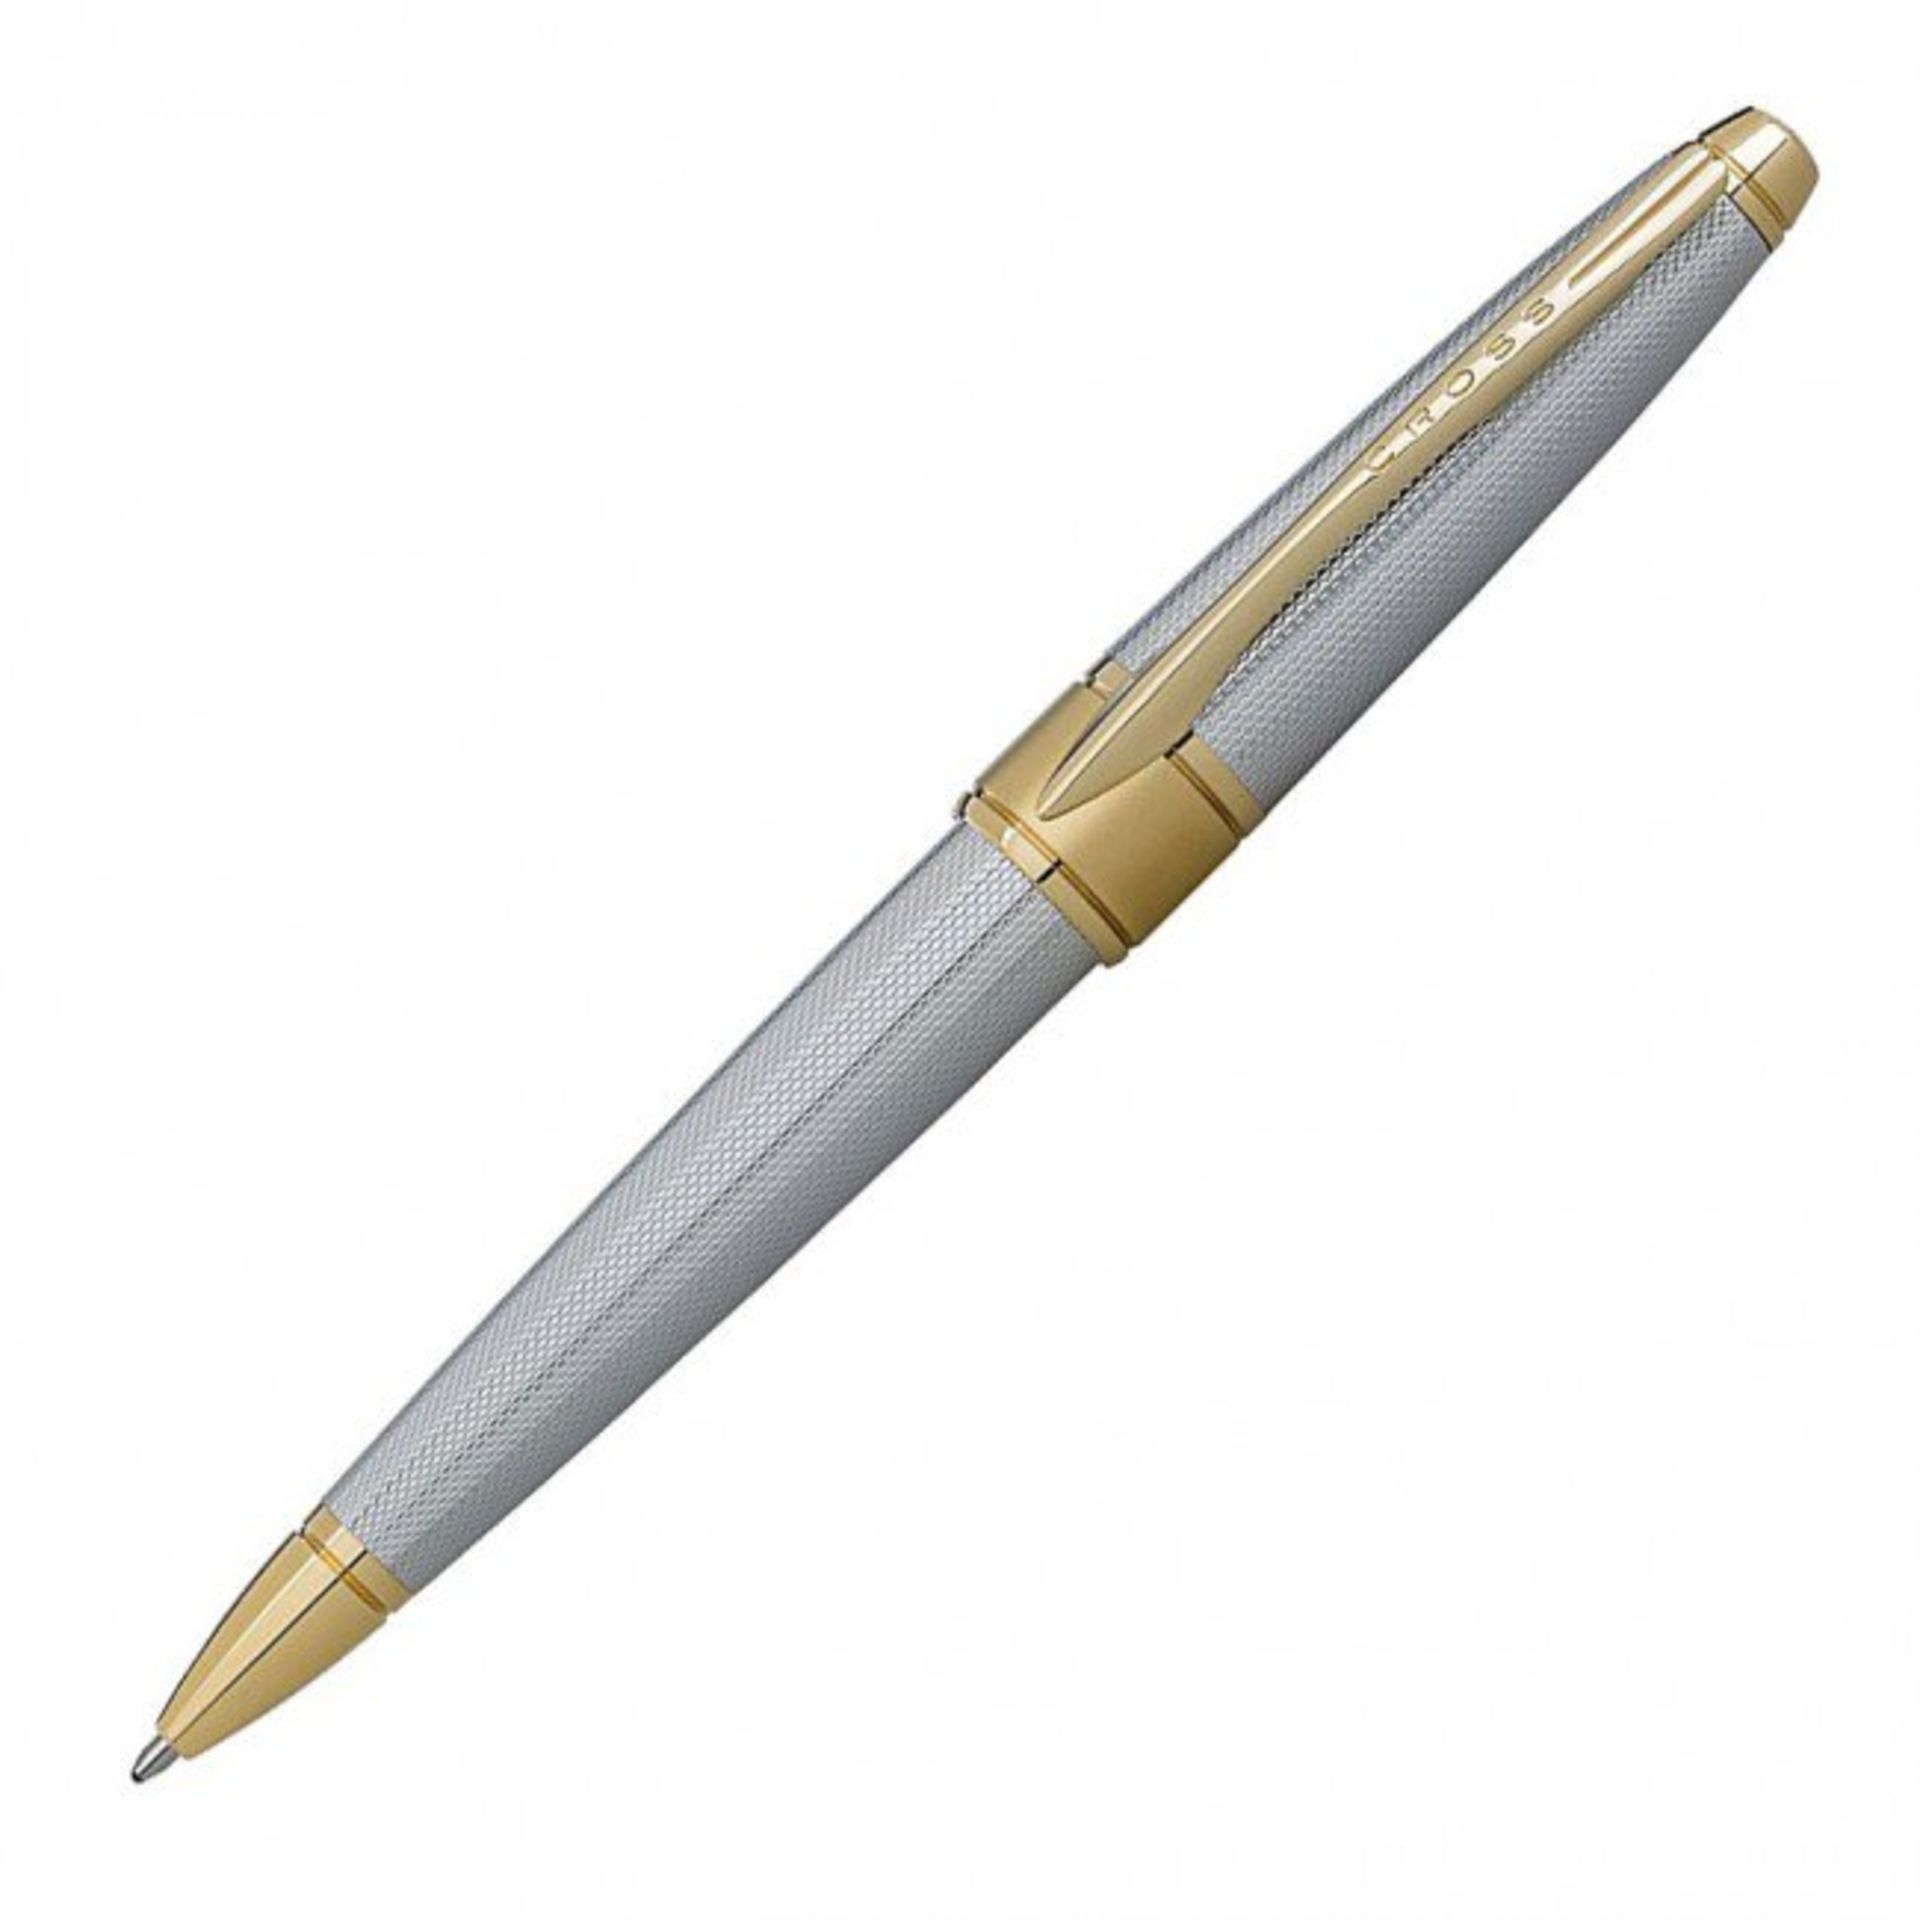 V Brand New Cross Apogee Ballpoint Pen Chrome And Gold Plate In Luxury Gift Box RRP£115.00